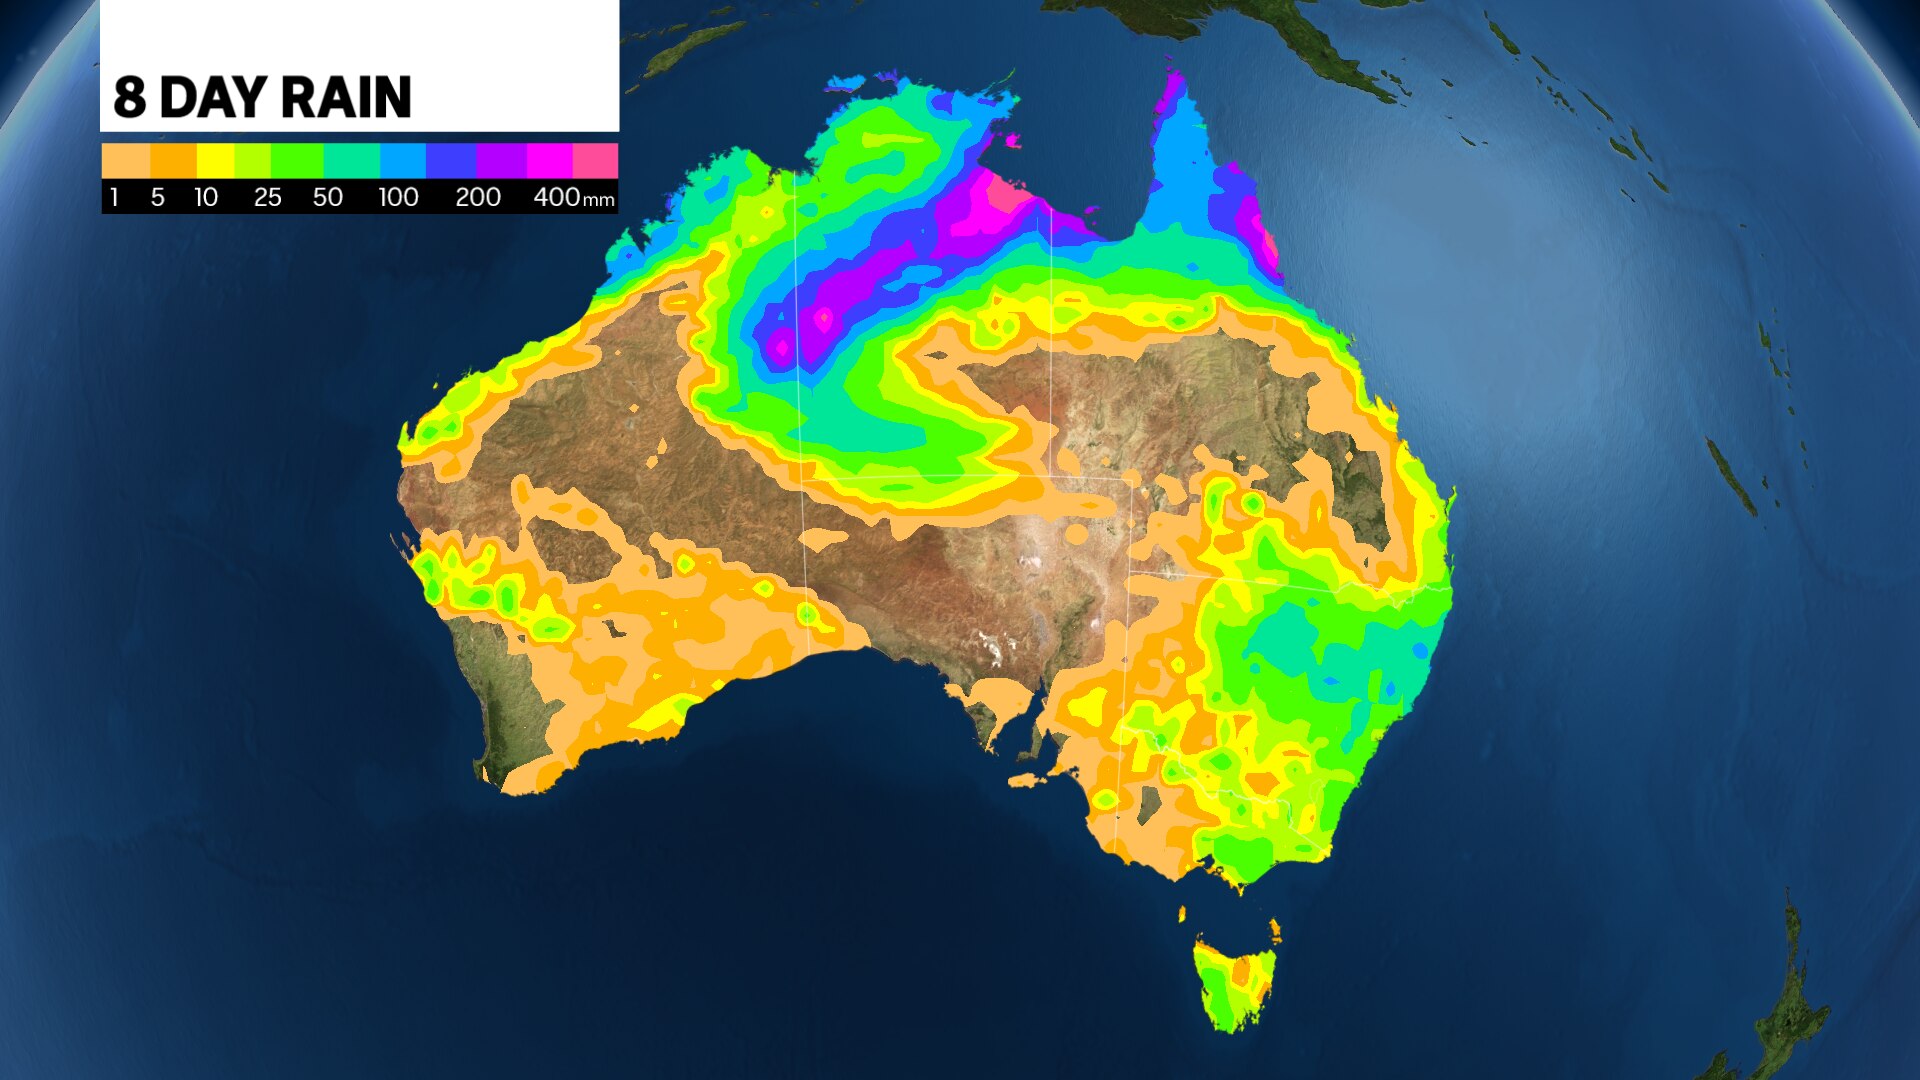 Map of Australia showing rain forecast over eight days